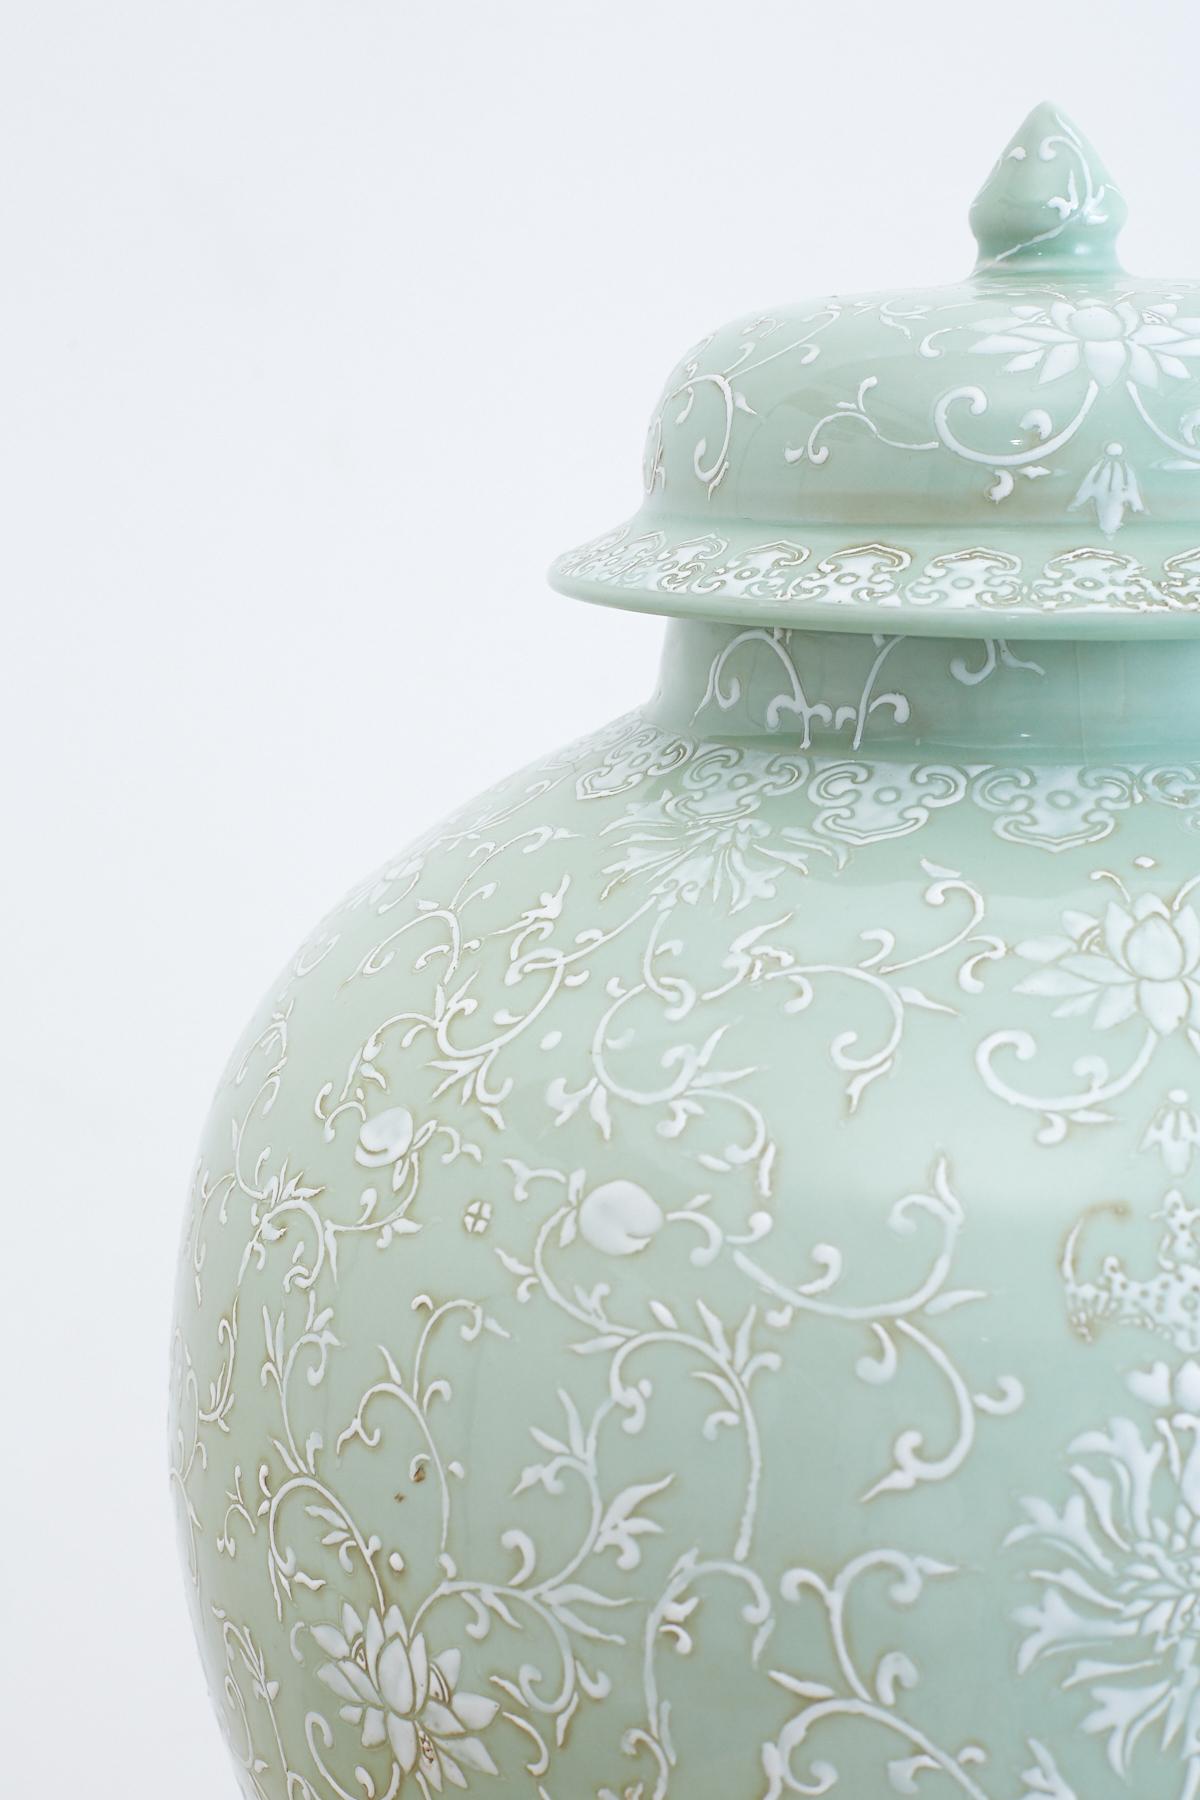 20th Century Monumental Celadon Ginger Jar with Moriage Decoration